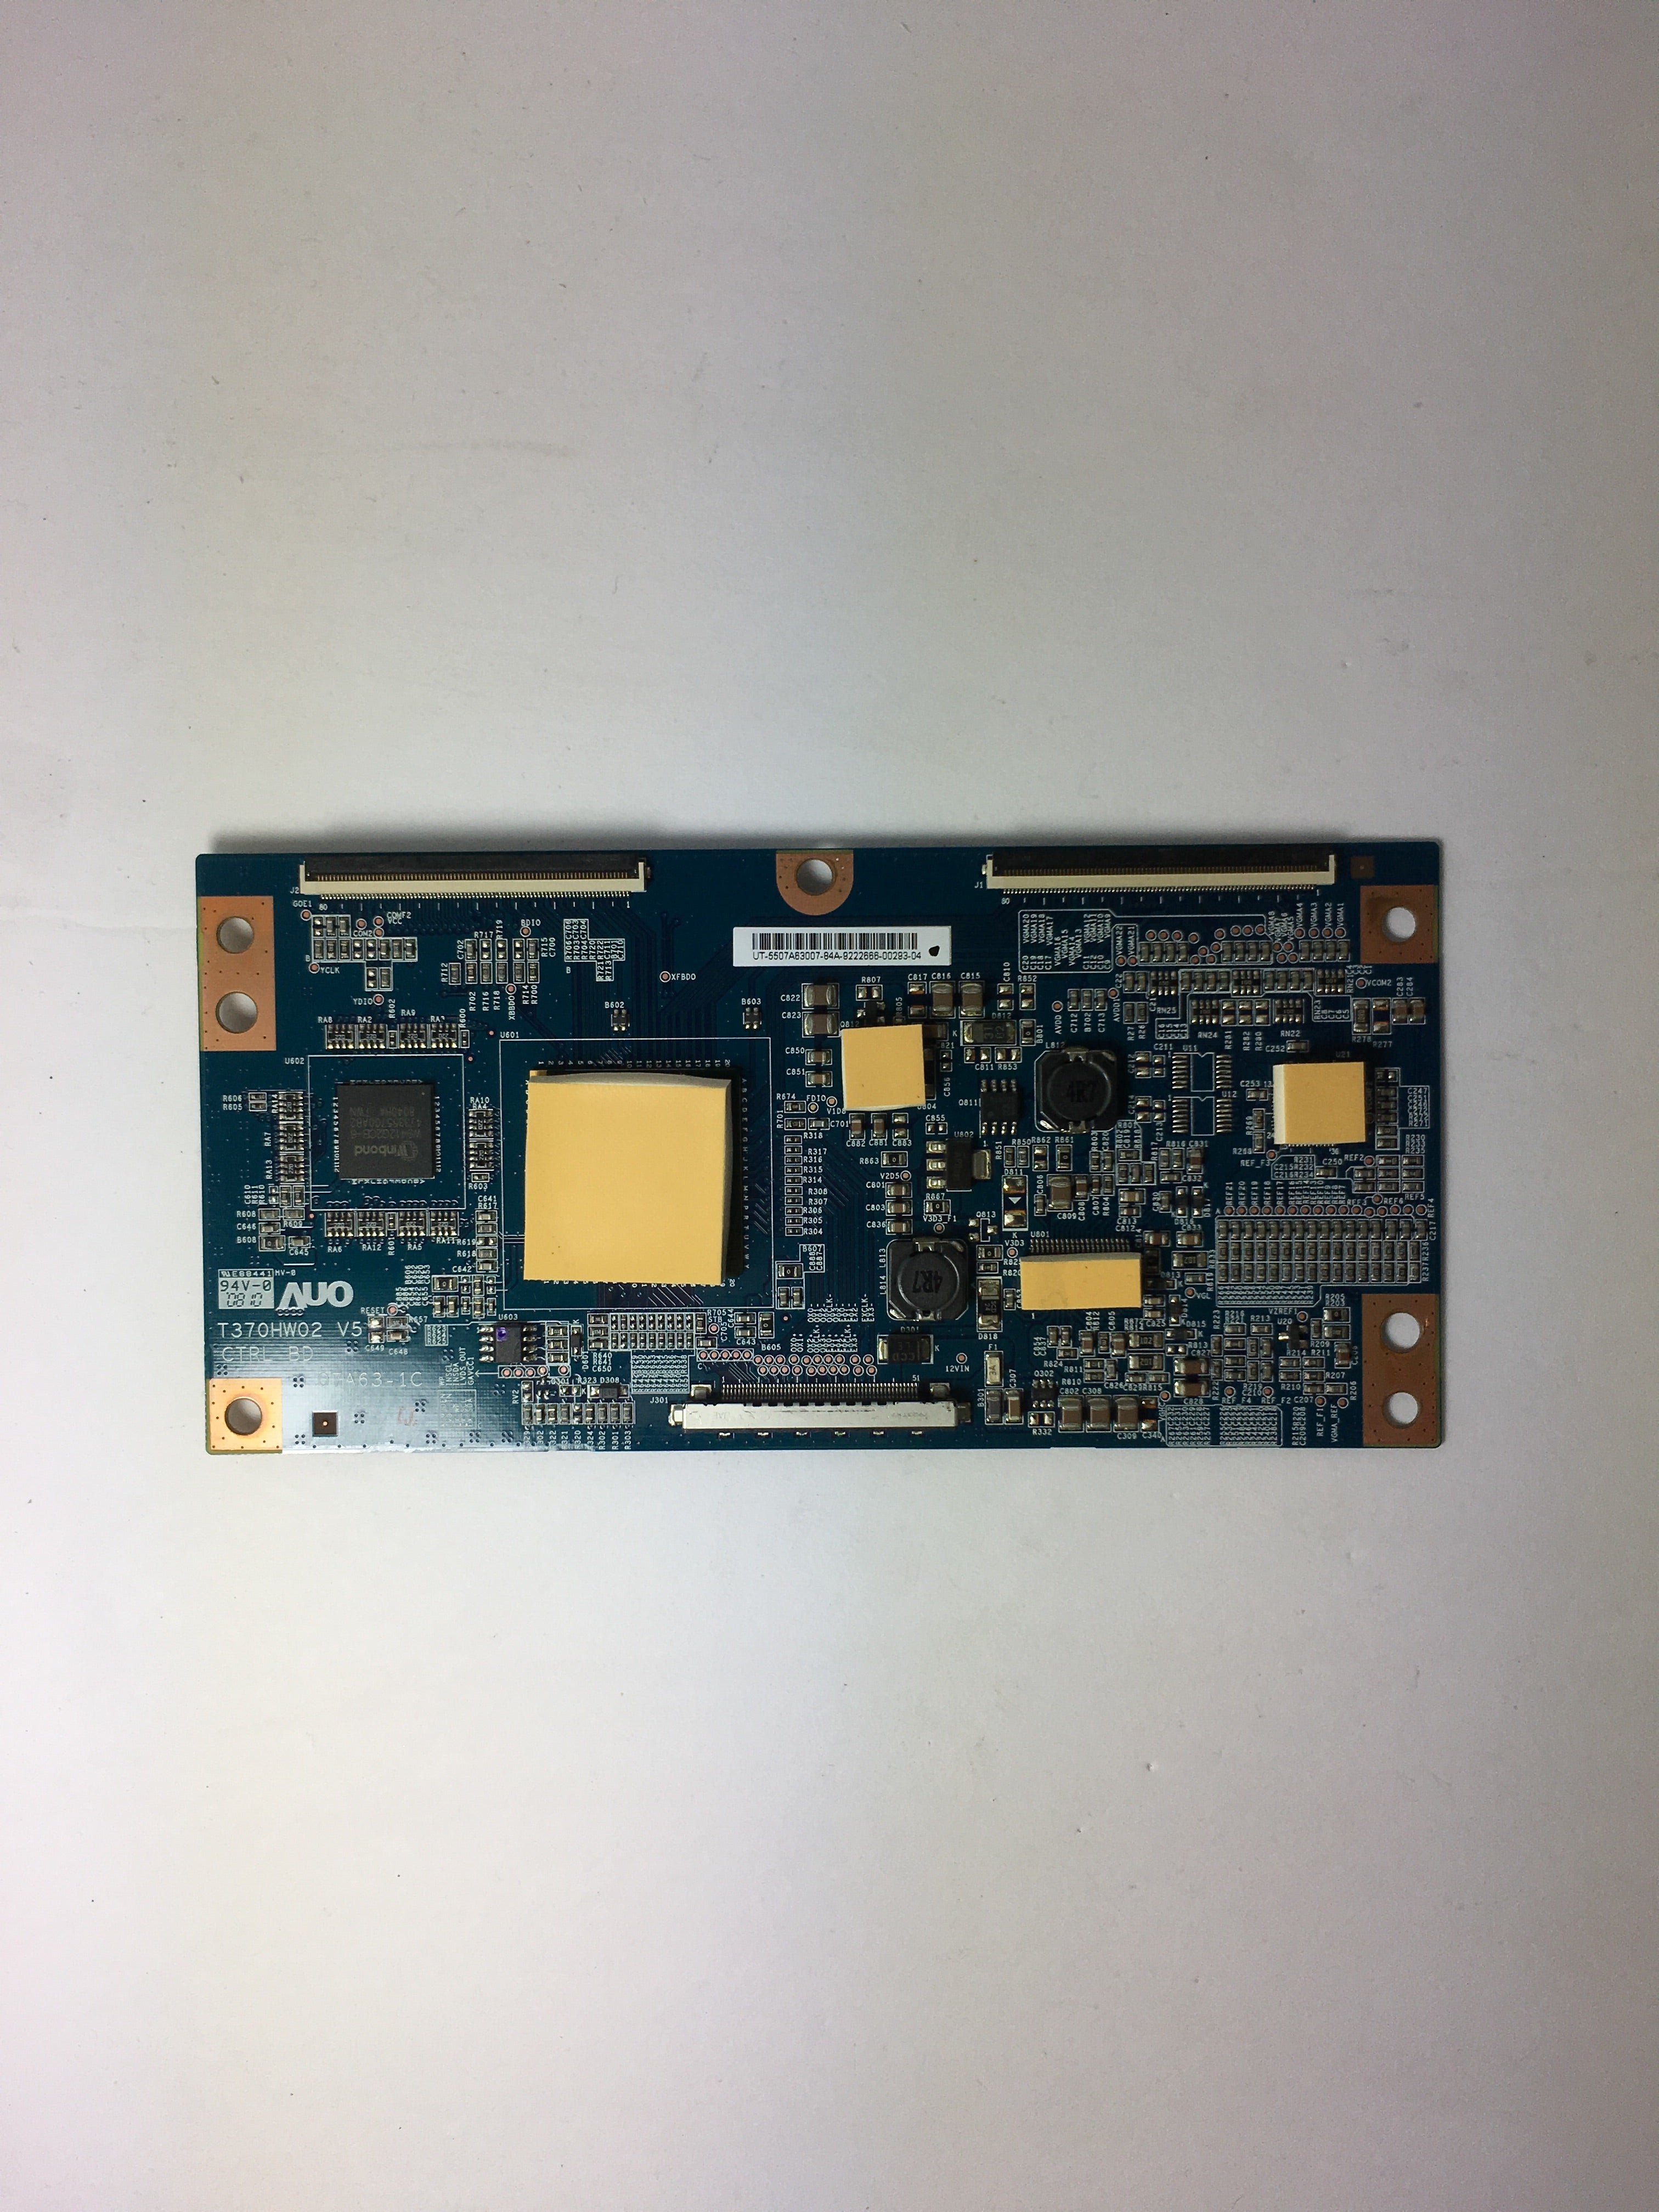 Sony 55.07A63.007 T-Con Board for KDL-37XBR6 (T370HW02 V5 / 07A63-1C)